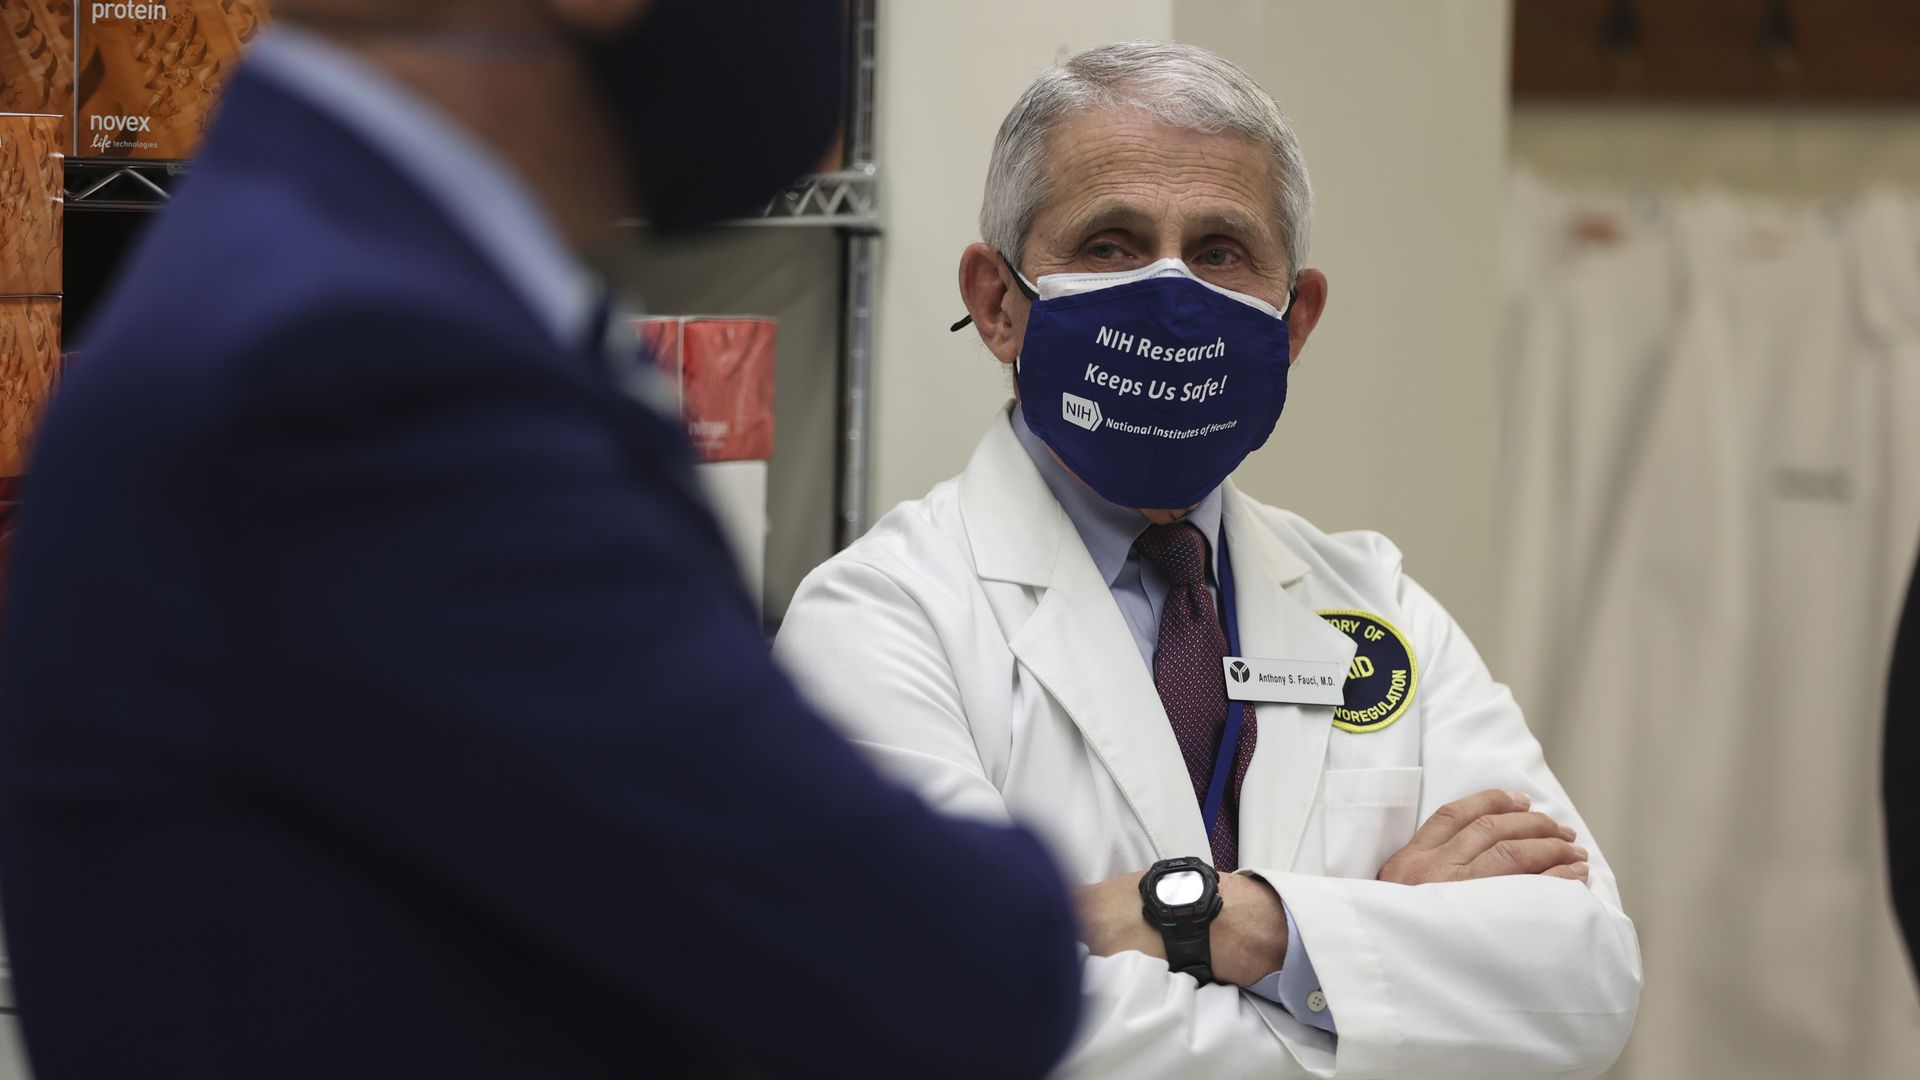 Dr. Fauci wears a mask and lab coat